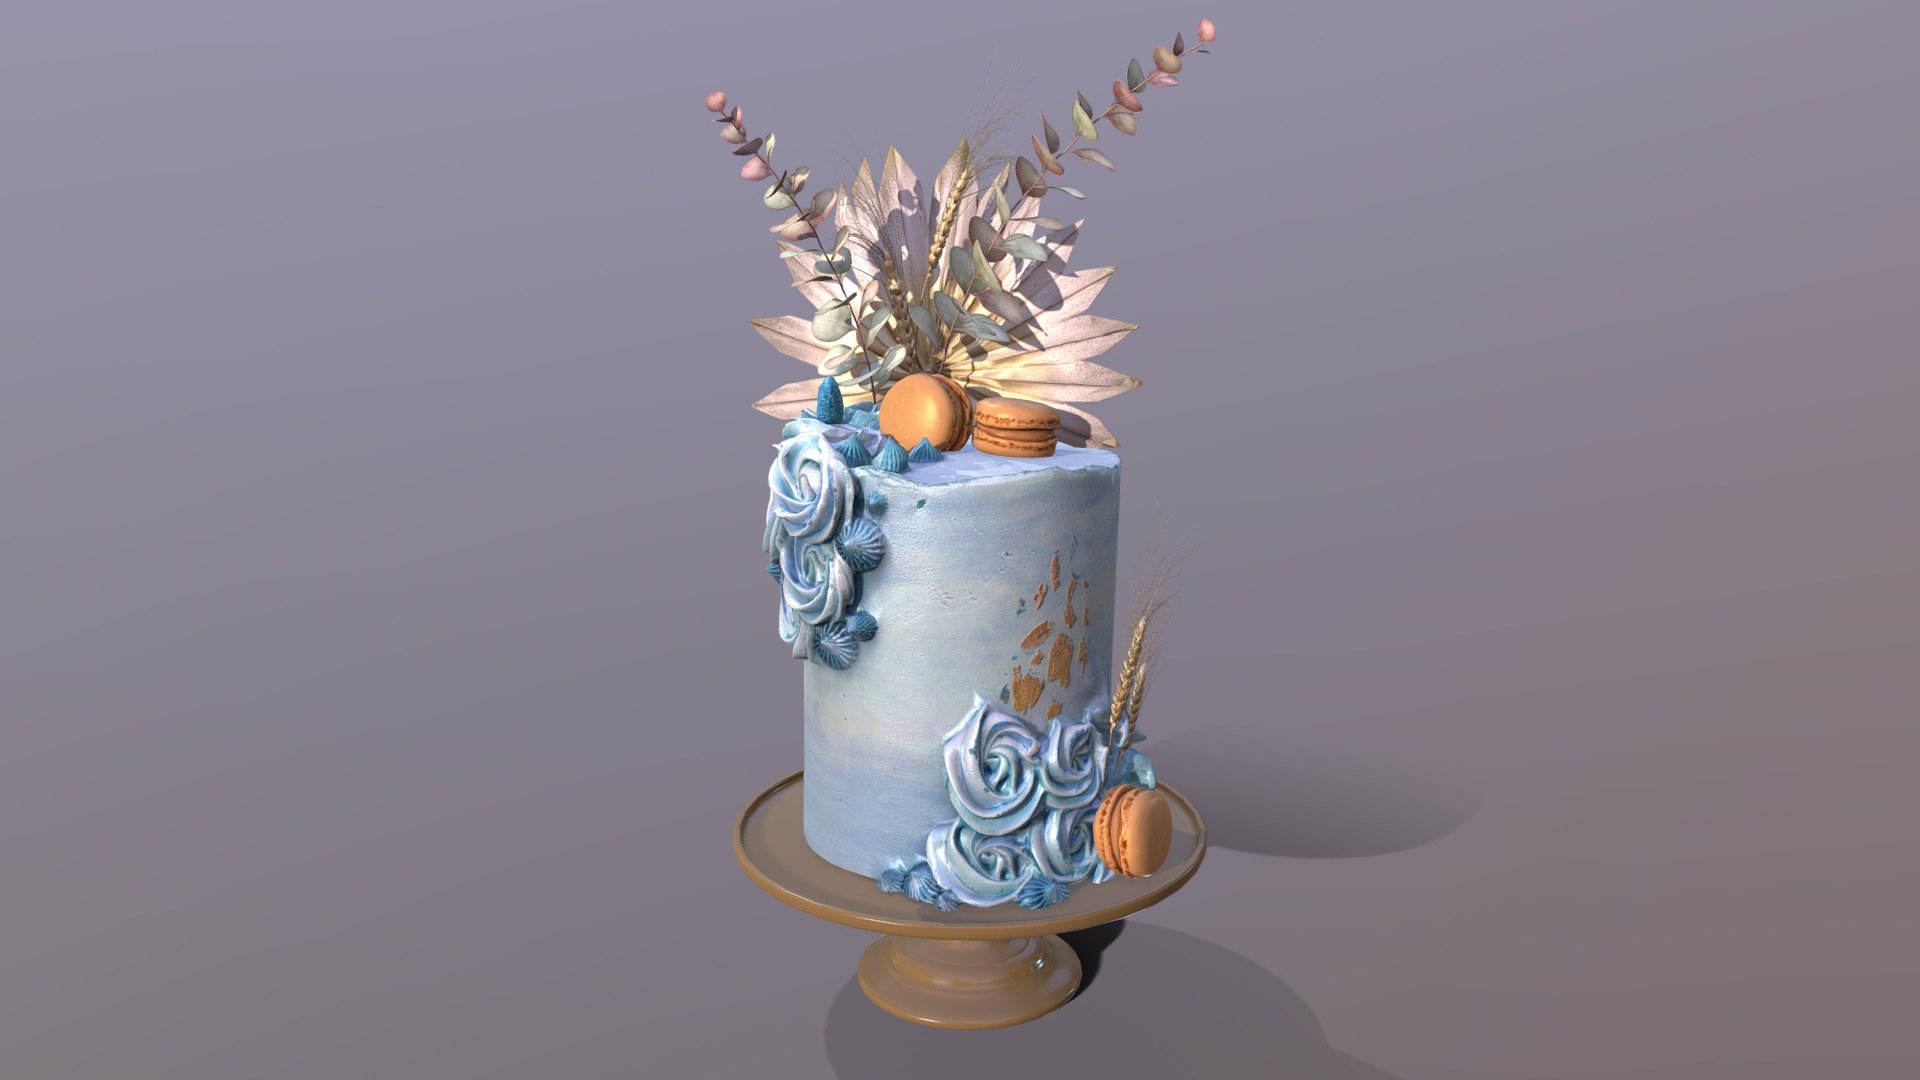 3D scan of a Luxury Aegean Buttercream Swirl Cake on the elegant mosser stand which is made by CAKESBURG Online Premium Cake Shop in UK.

This 3D cake can be personalised with any text and colour you want. Please contact us.

You can also order real cake from this link: https://cakesburg.co.uk/products/luxury-buttercream-cake-06?_pos=1&amp;_sid=685b5456e&amp;_ss=r

Cake Textures - 4096*4096px PBR photoscan-based materials (Base Color, Normal, Roughness, Specular, AO)

Macarone textures - 4096*4096px PBR photoscan-based materials (Base Color, Normal, Roughness, Specular, AO)

Palm, Eucalyptus and Wheat Textures - 4096*4096px PBR photoscan-based materials (Base Color, Normal, Roughness, Specular, AO) - Luxury Aegean Swirl Cake - Buy Royalty Free 3D model by Cakesburg Premium 3D Cake Shop (@Viscom_Cakesburg) 3d model